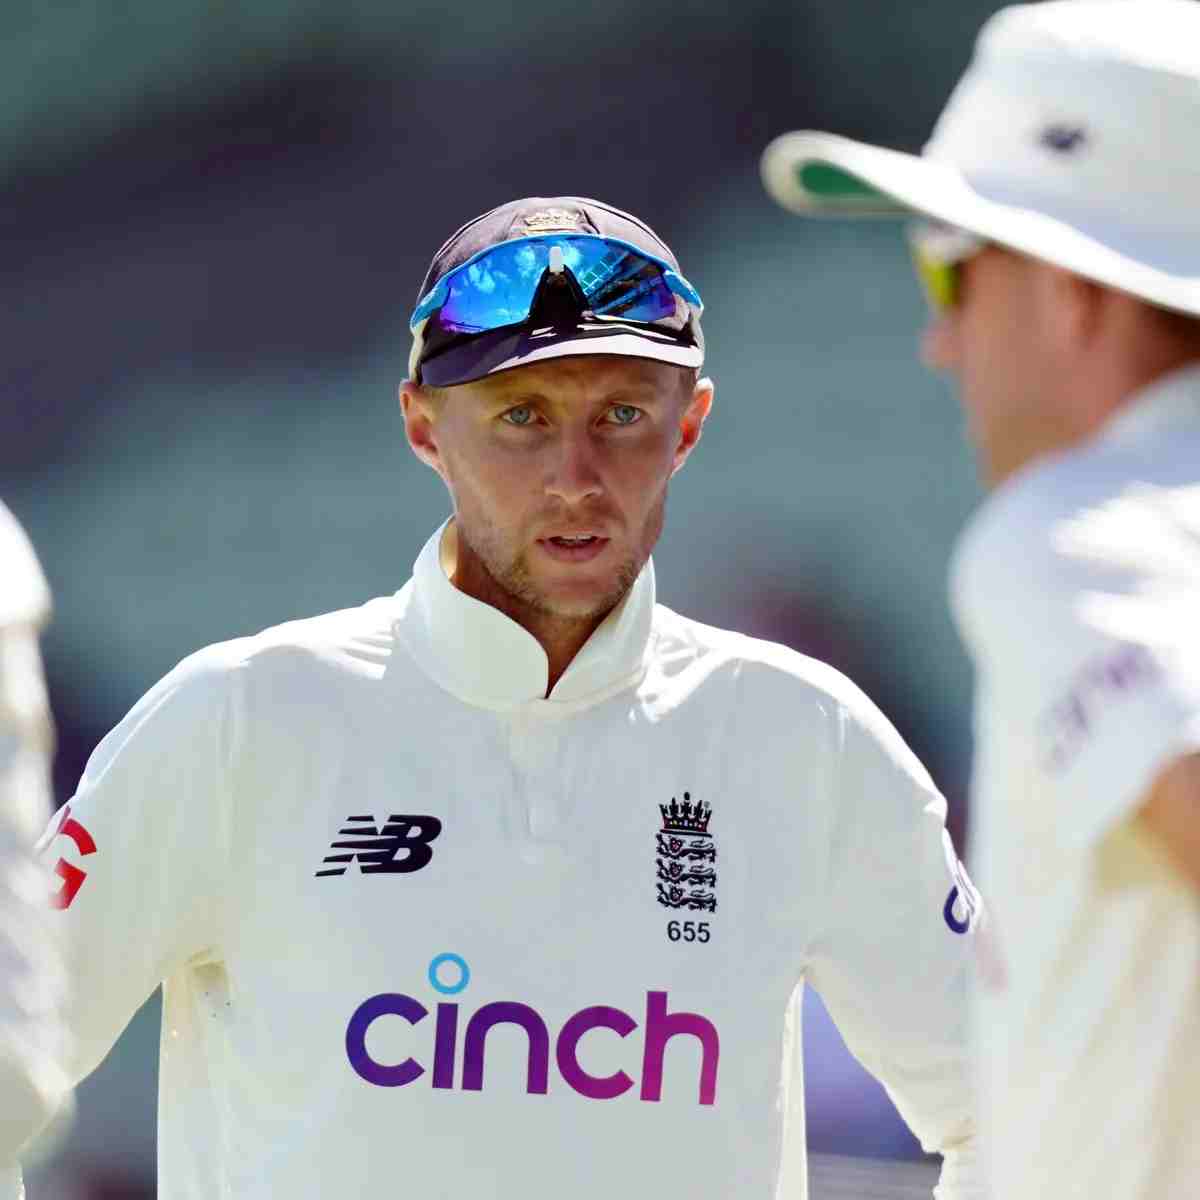 Will Joe Root want to bat at number 3 after the injury of Ollie Pope? - He responds